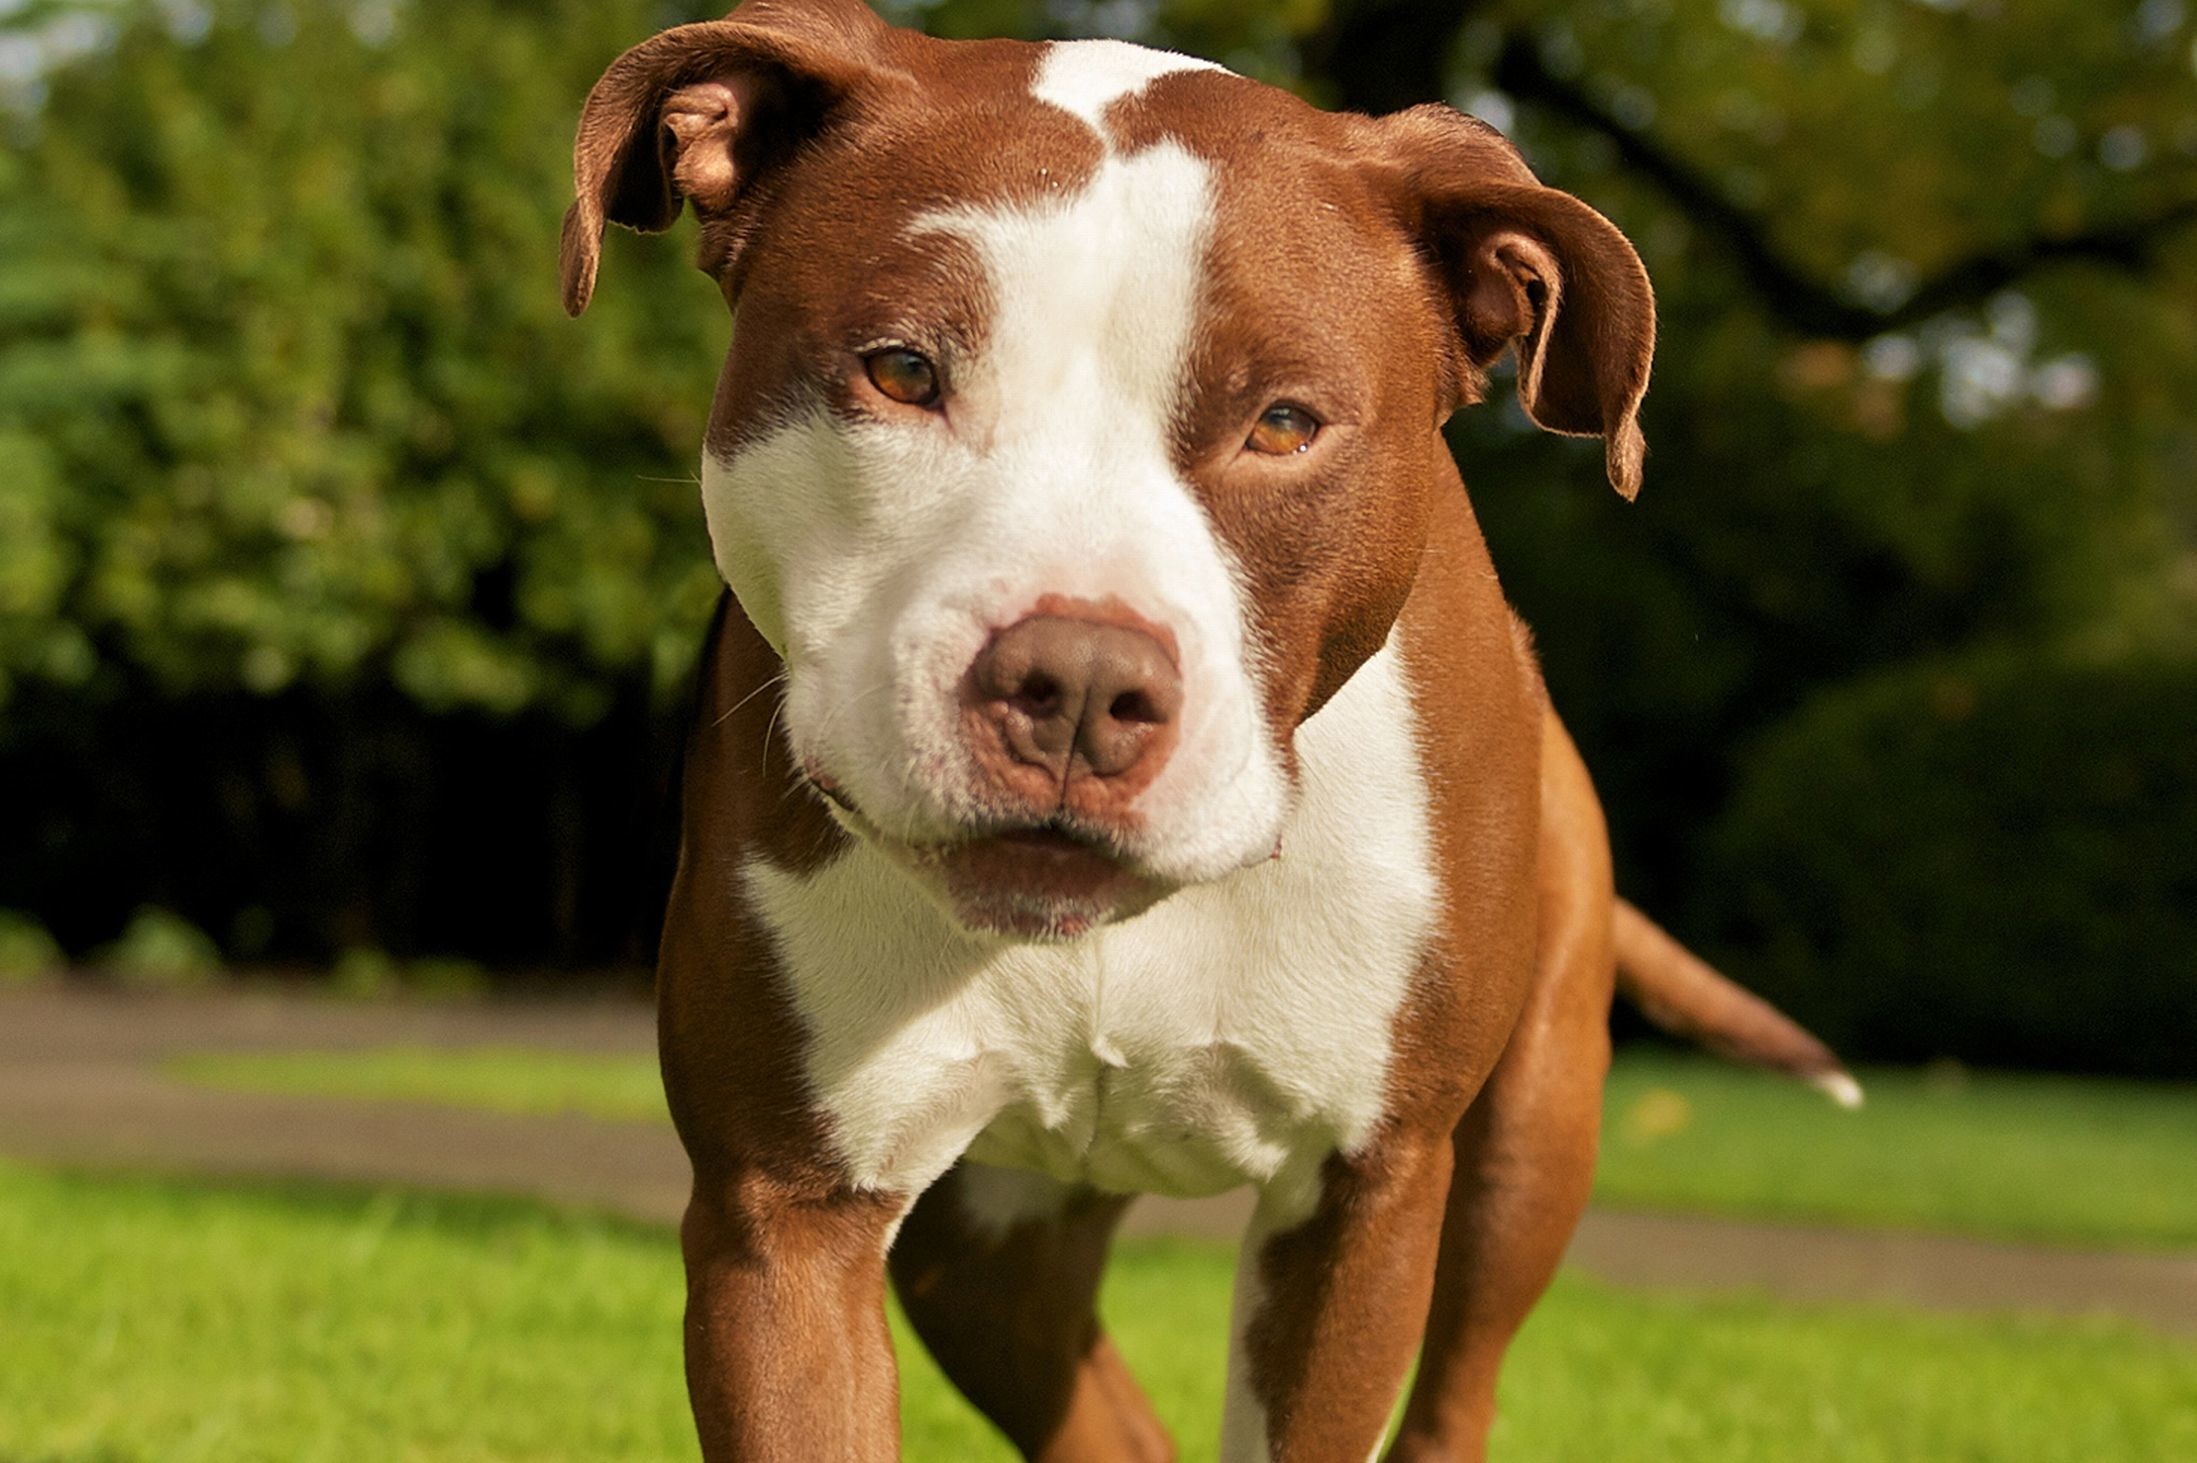 2197x1463 GL; Pitbull Dog 4091627 Wallpaper for Free | Special HQFX Wallpapers ...